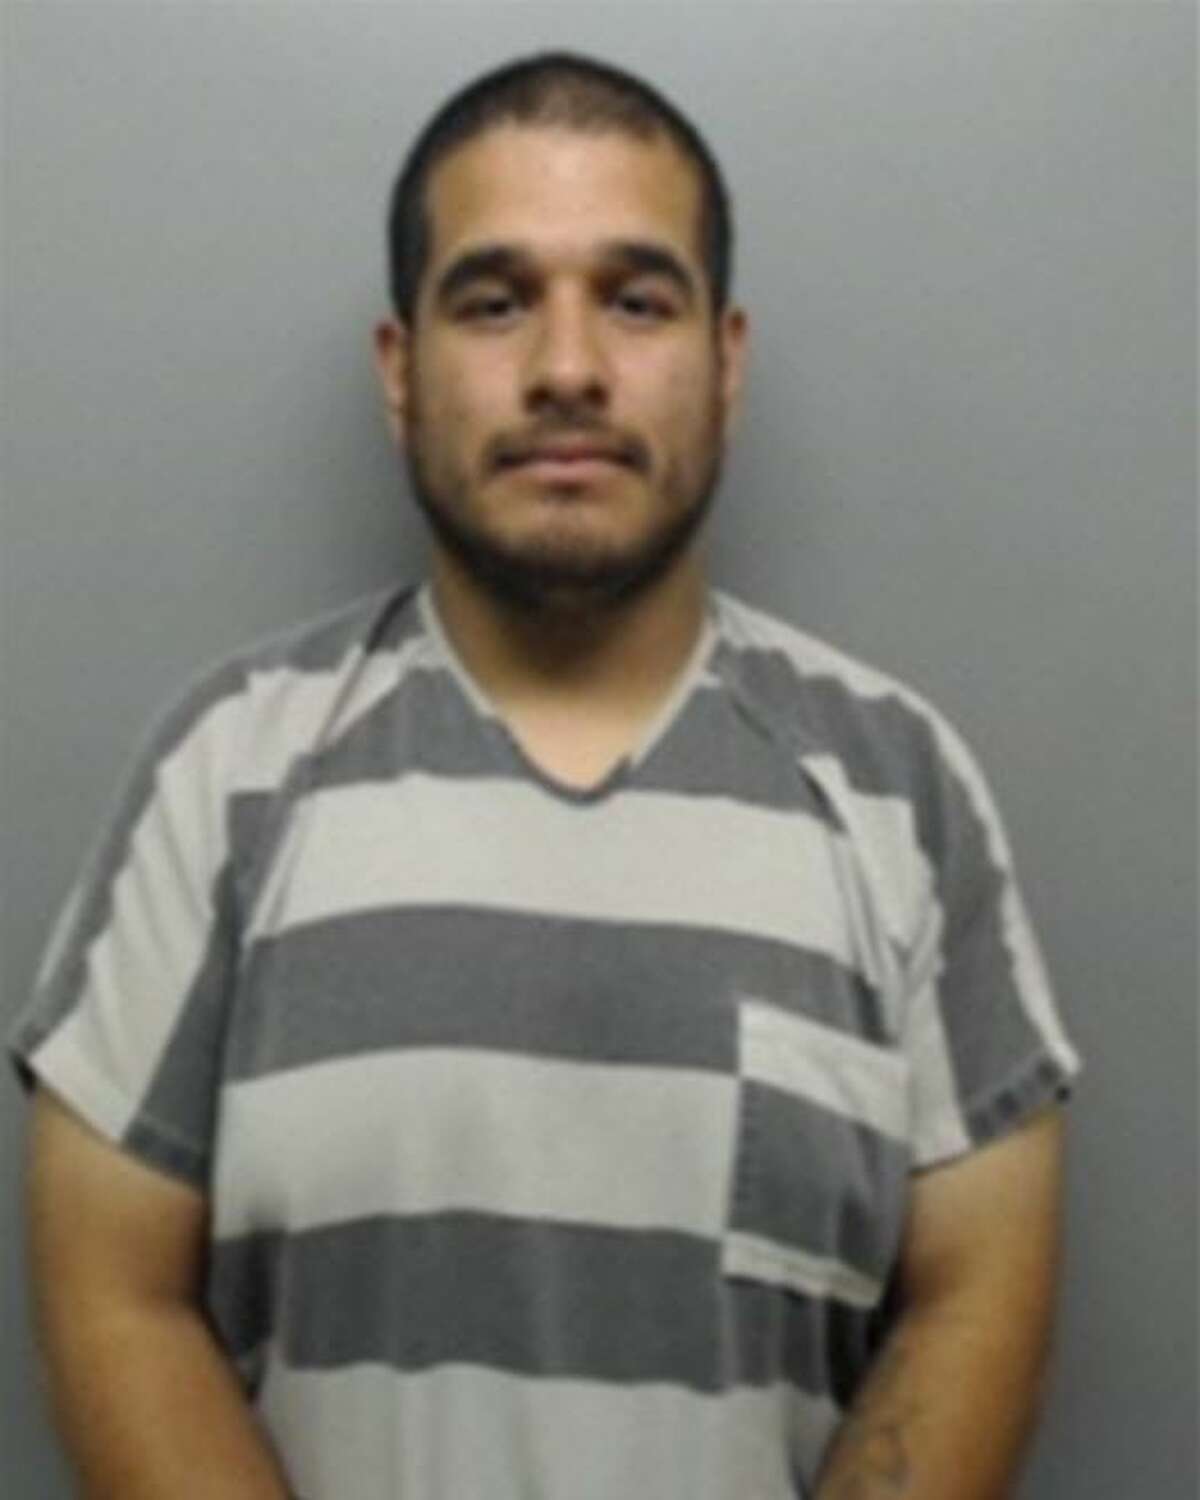 Jeffrey Solis, 24 was served with a warrant that charged him with discharge of a firearm in certain municipalities.